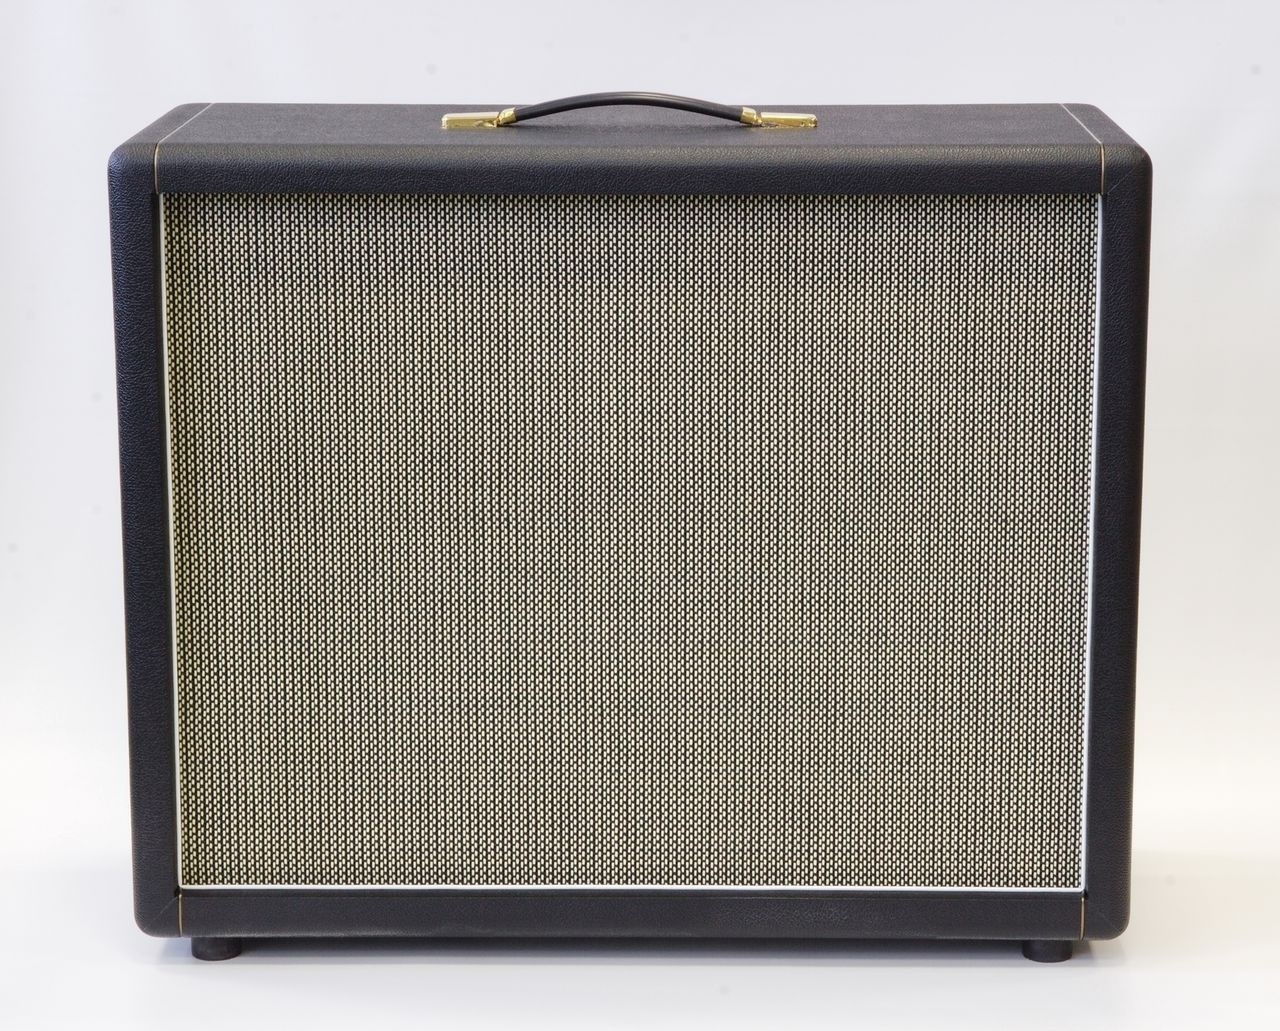 2x12" Thick-Lip Cab fully loaded with Celestion V-Type speakers 140W - READY-TO-SHIP